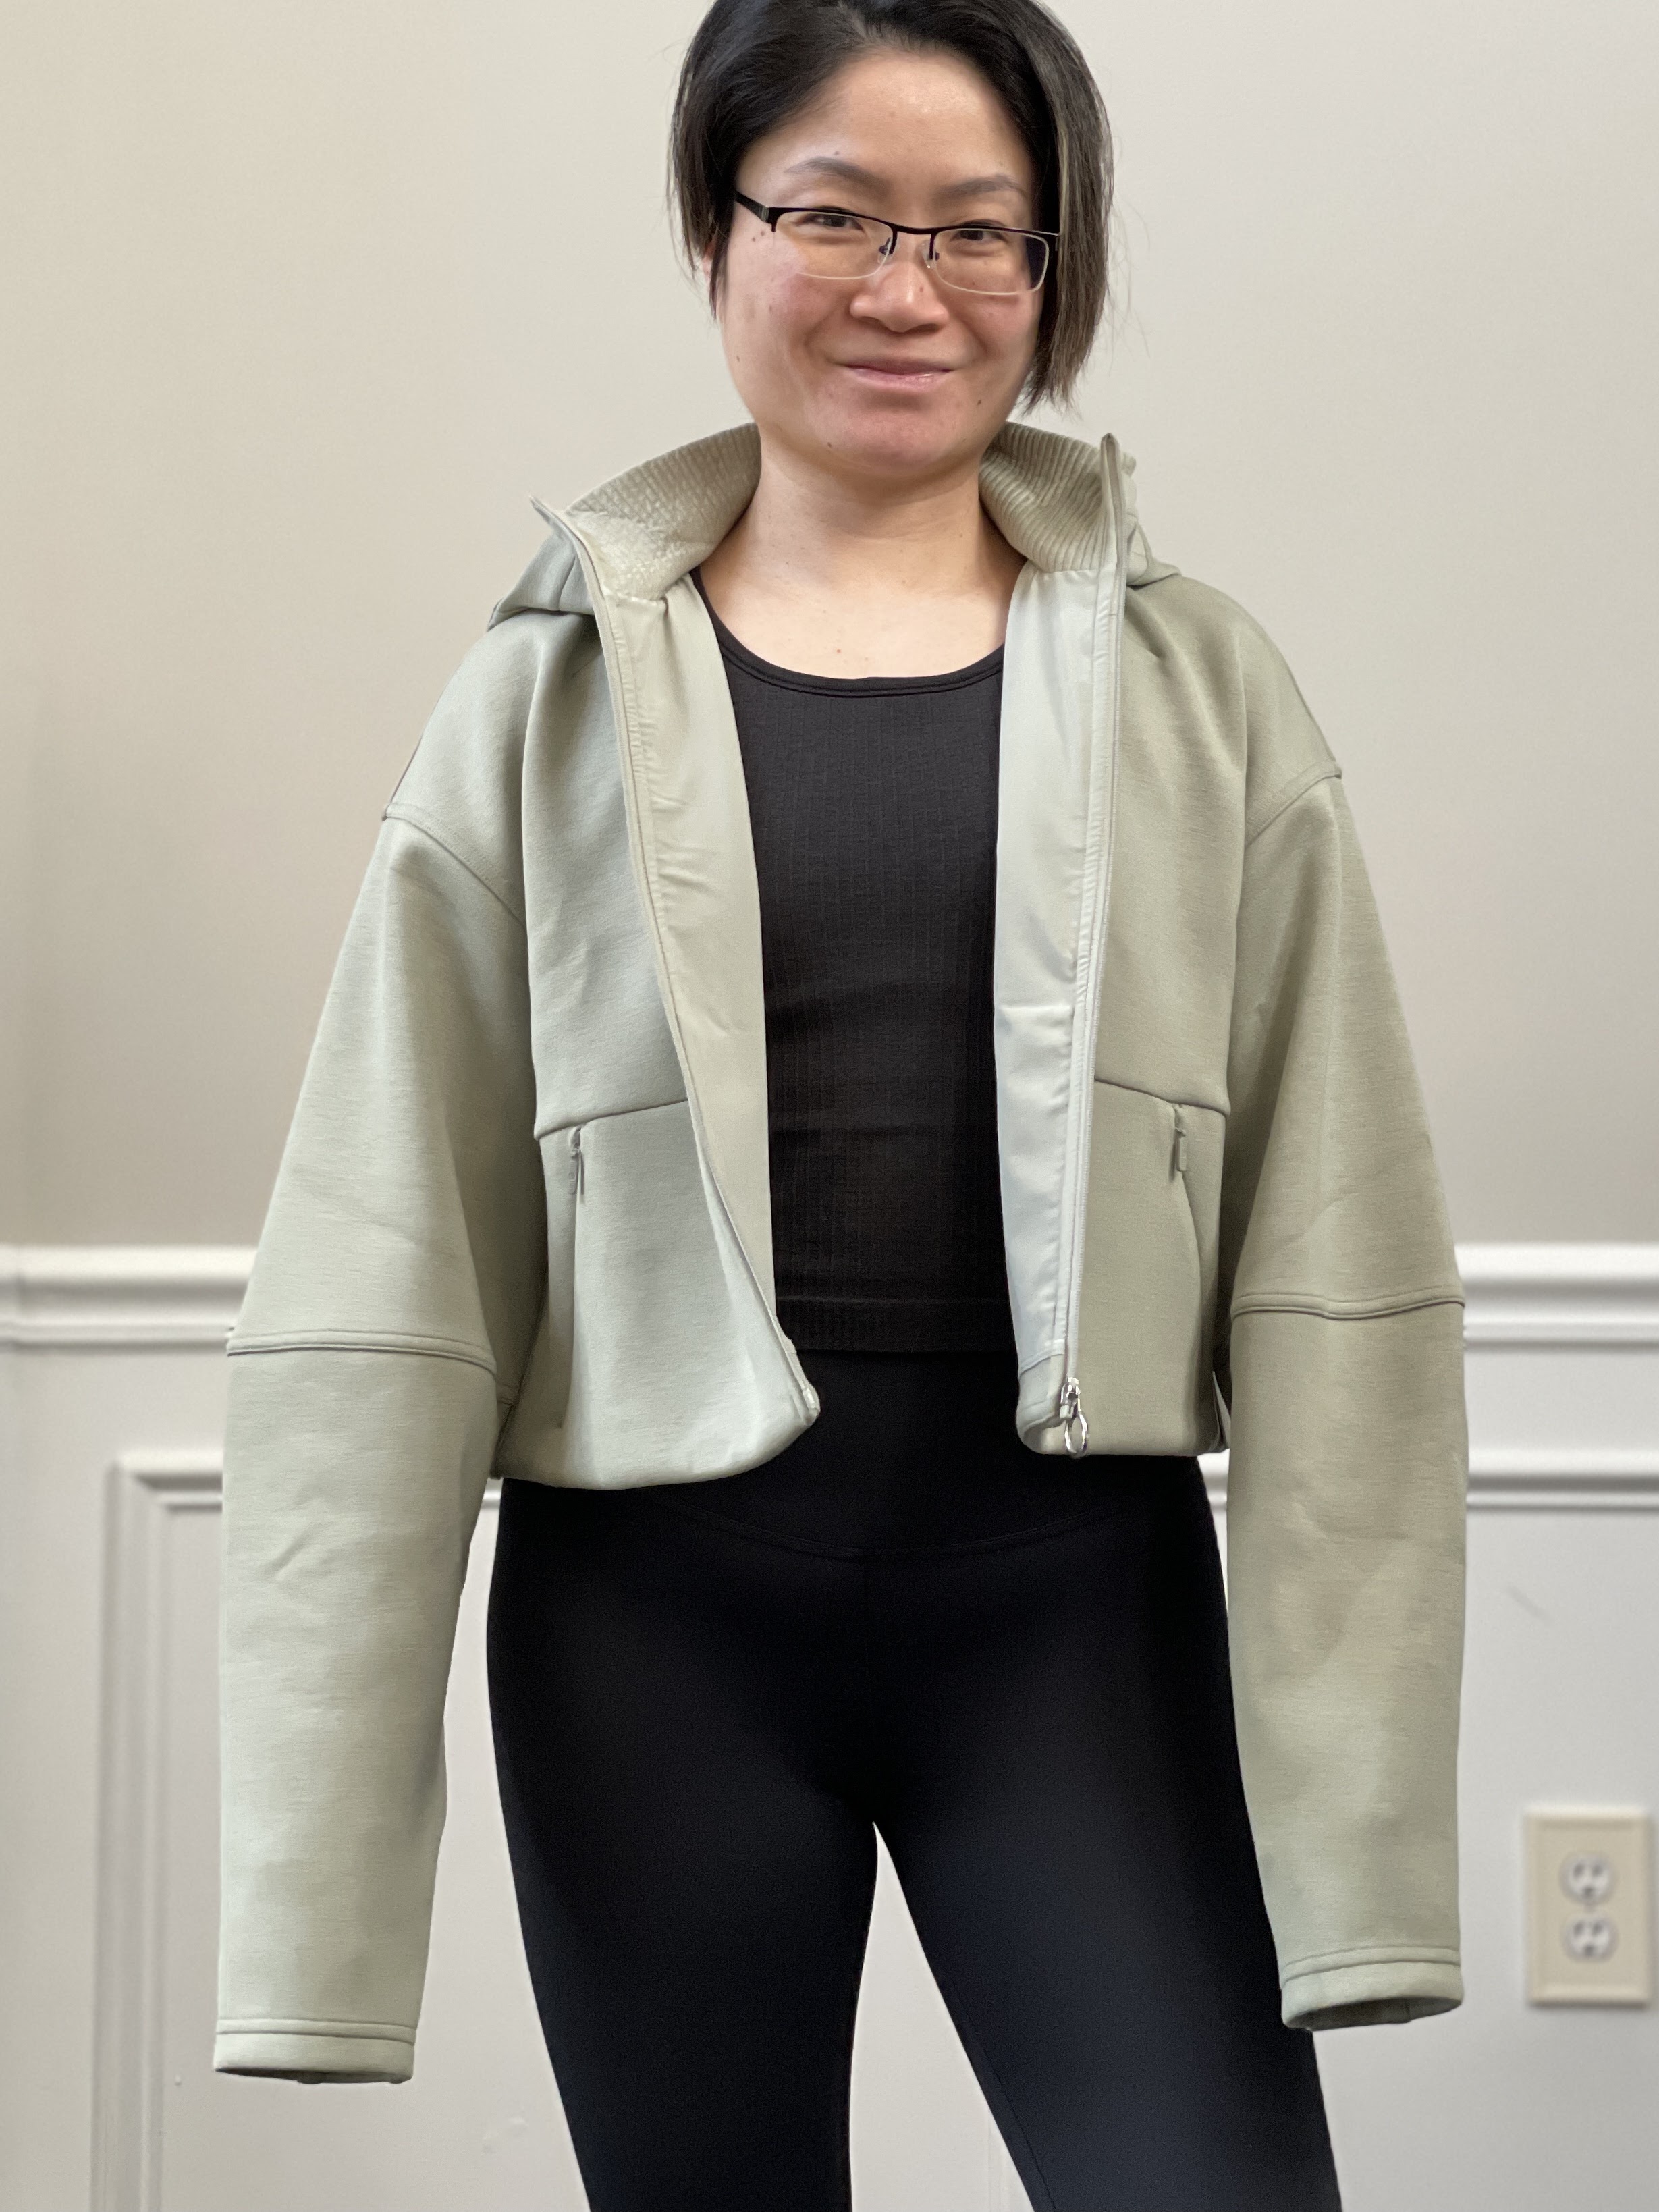 Fit Review Friday! Textured Cropped Jacket, Soft Oversized Zip Hoodie,  Prism Stripe Turquoise